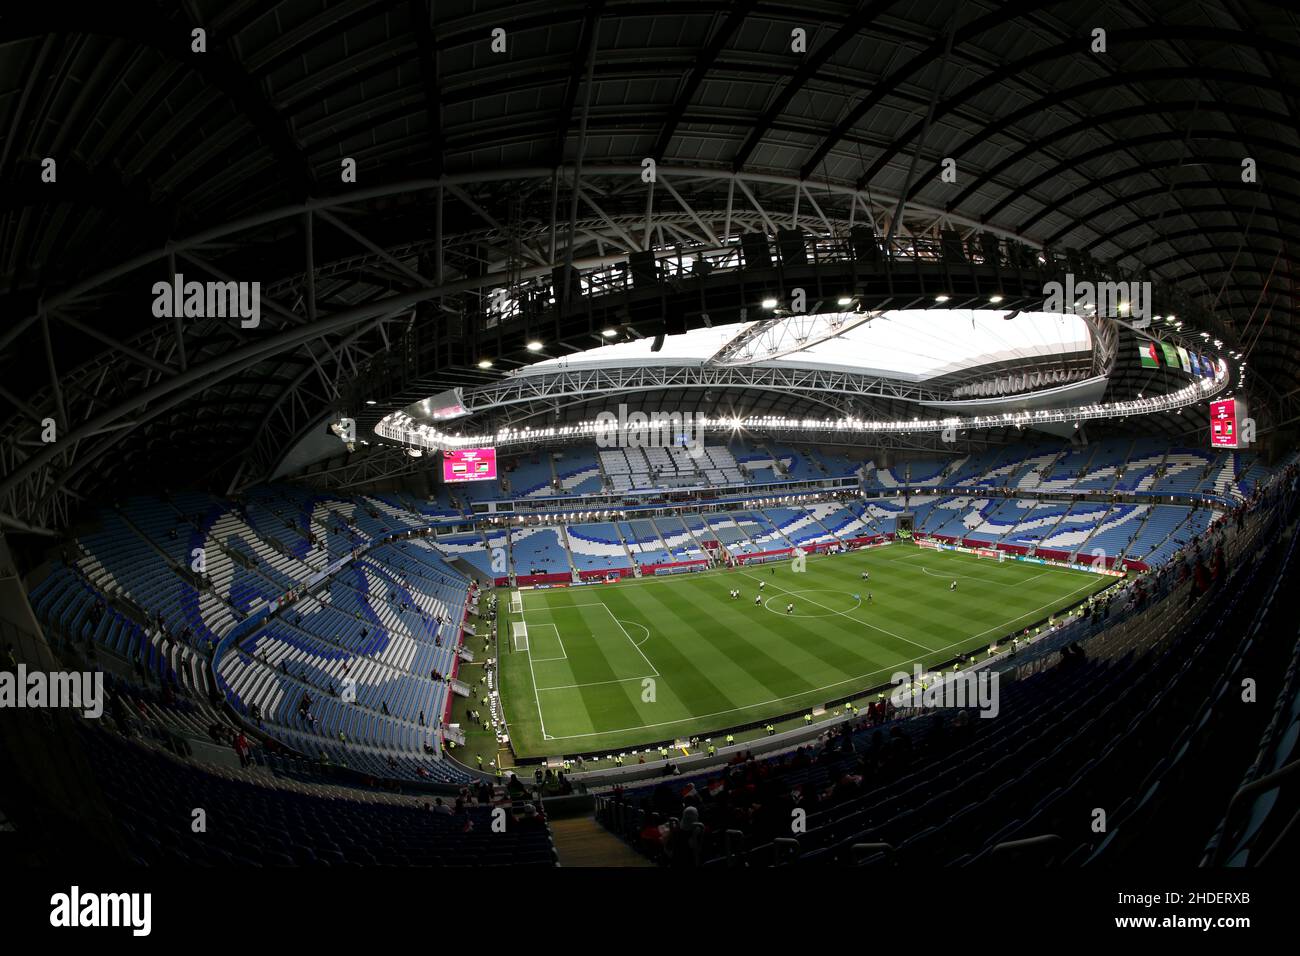 General view inside the Al Janoub Stadium in Al-Wakrah, Qatar, taken during the FIFA Arab Cup in the FIFA Arab Cup in the build up to the 2022 FIFA World Cup. Photo by MB Media 11/12/2021 Stock Photo